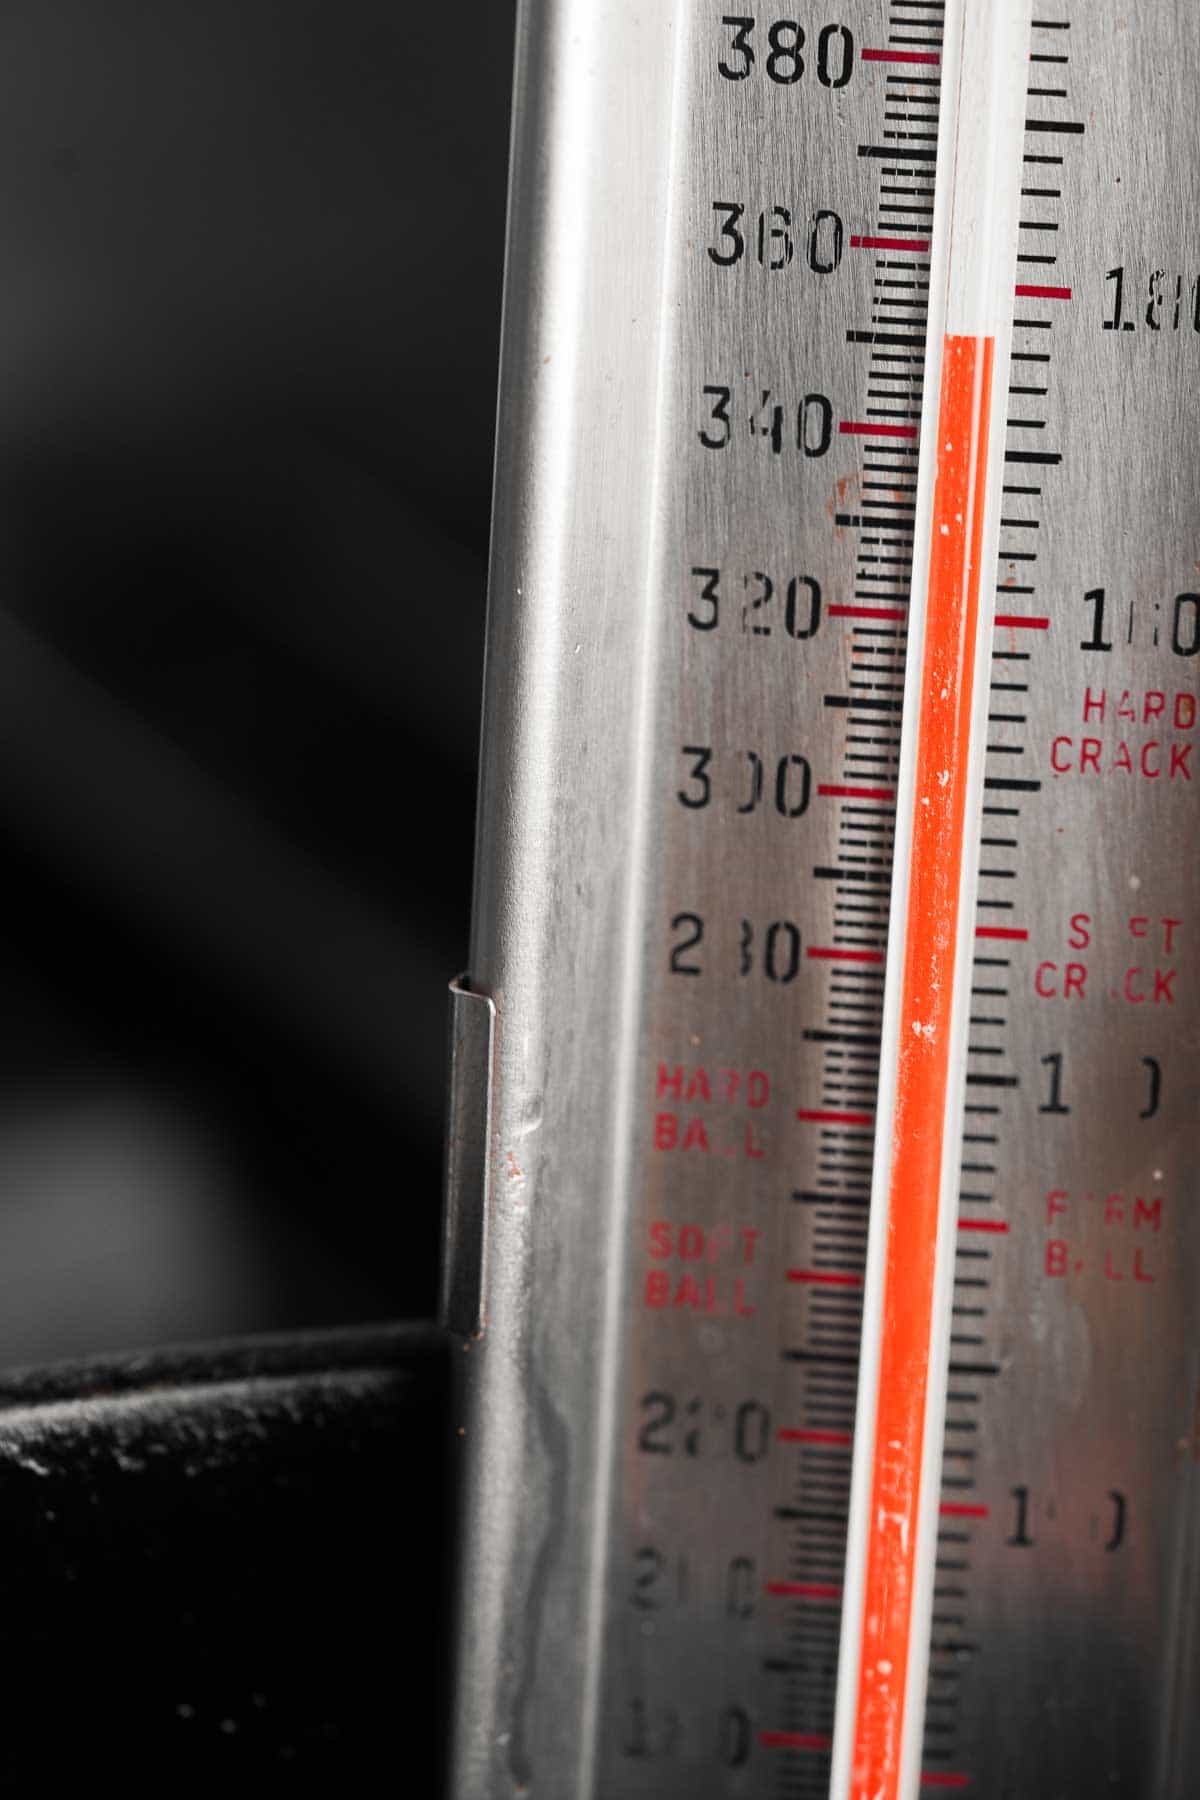 A close up of a thermometer reading 350 degrees.